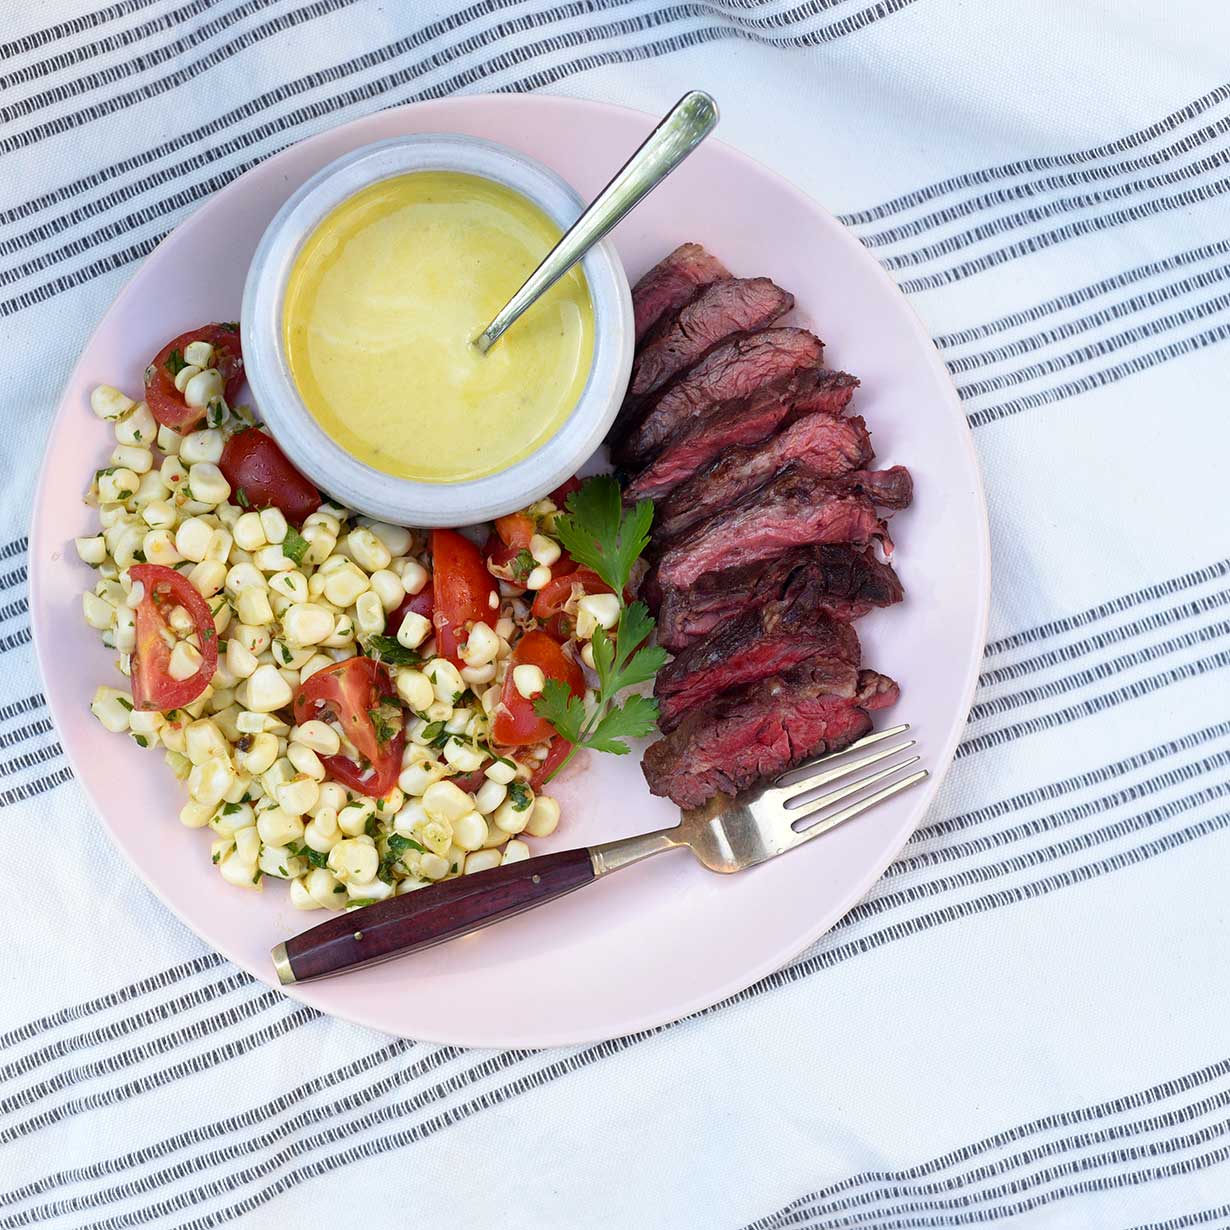 Hanger Steak with Mojo Sauce and Lime-Marinated Corn Salad